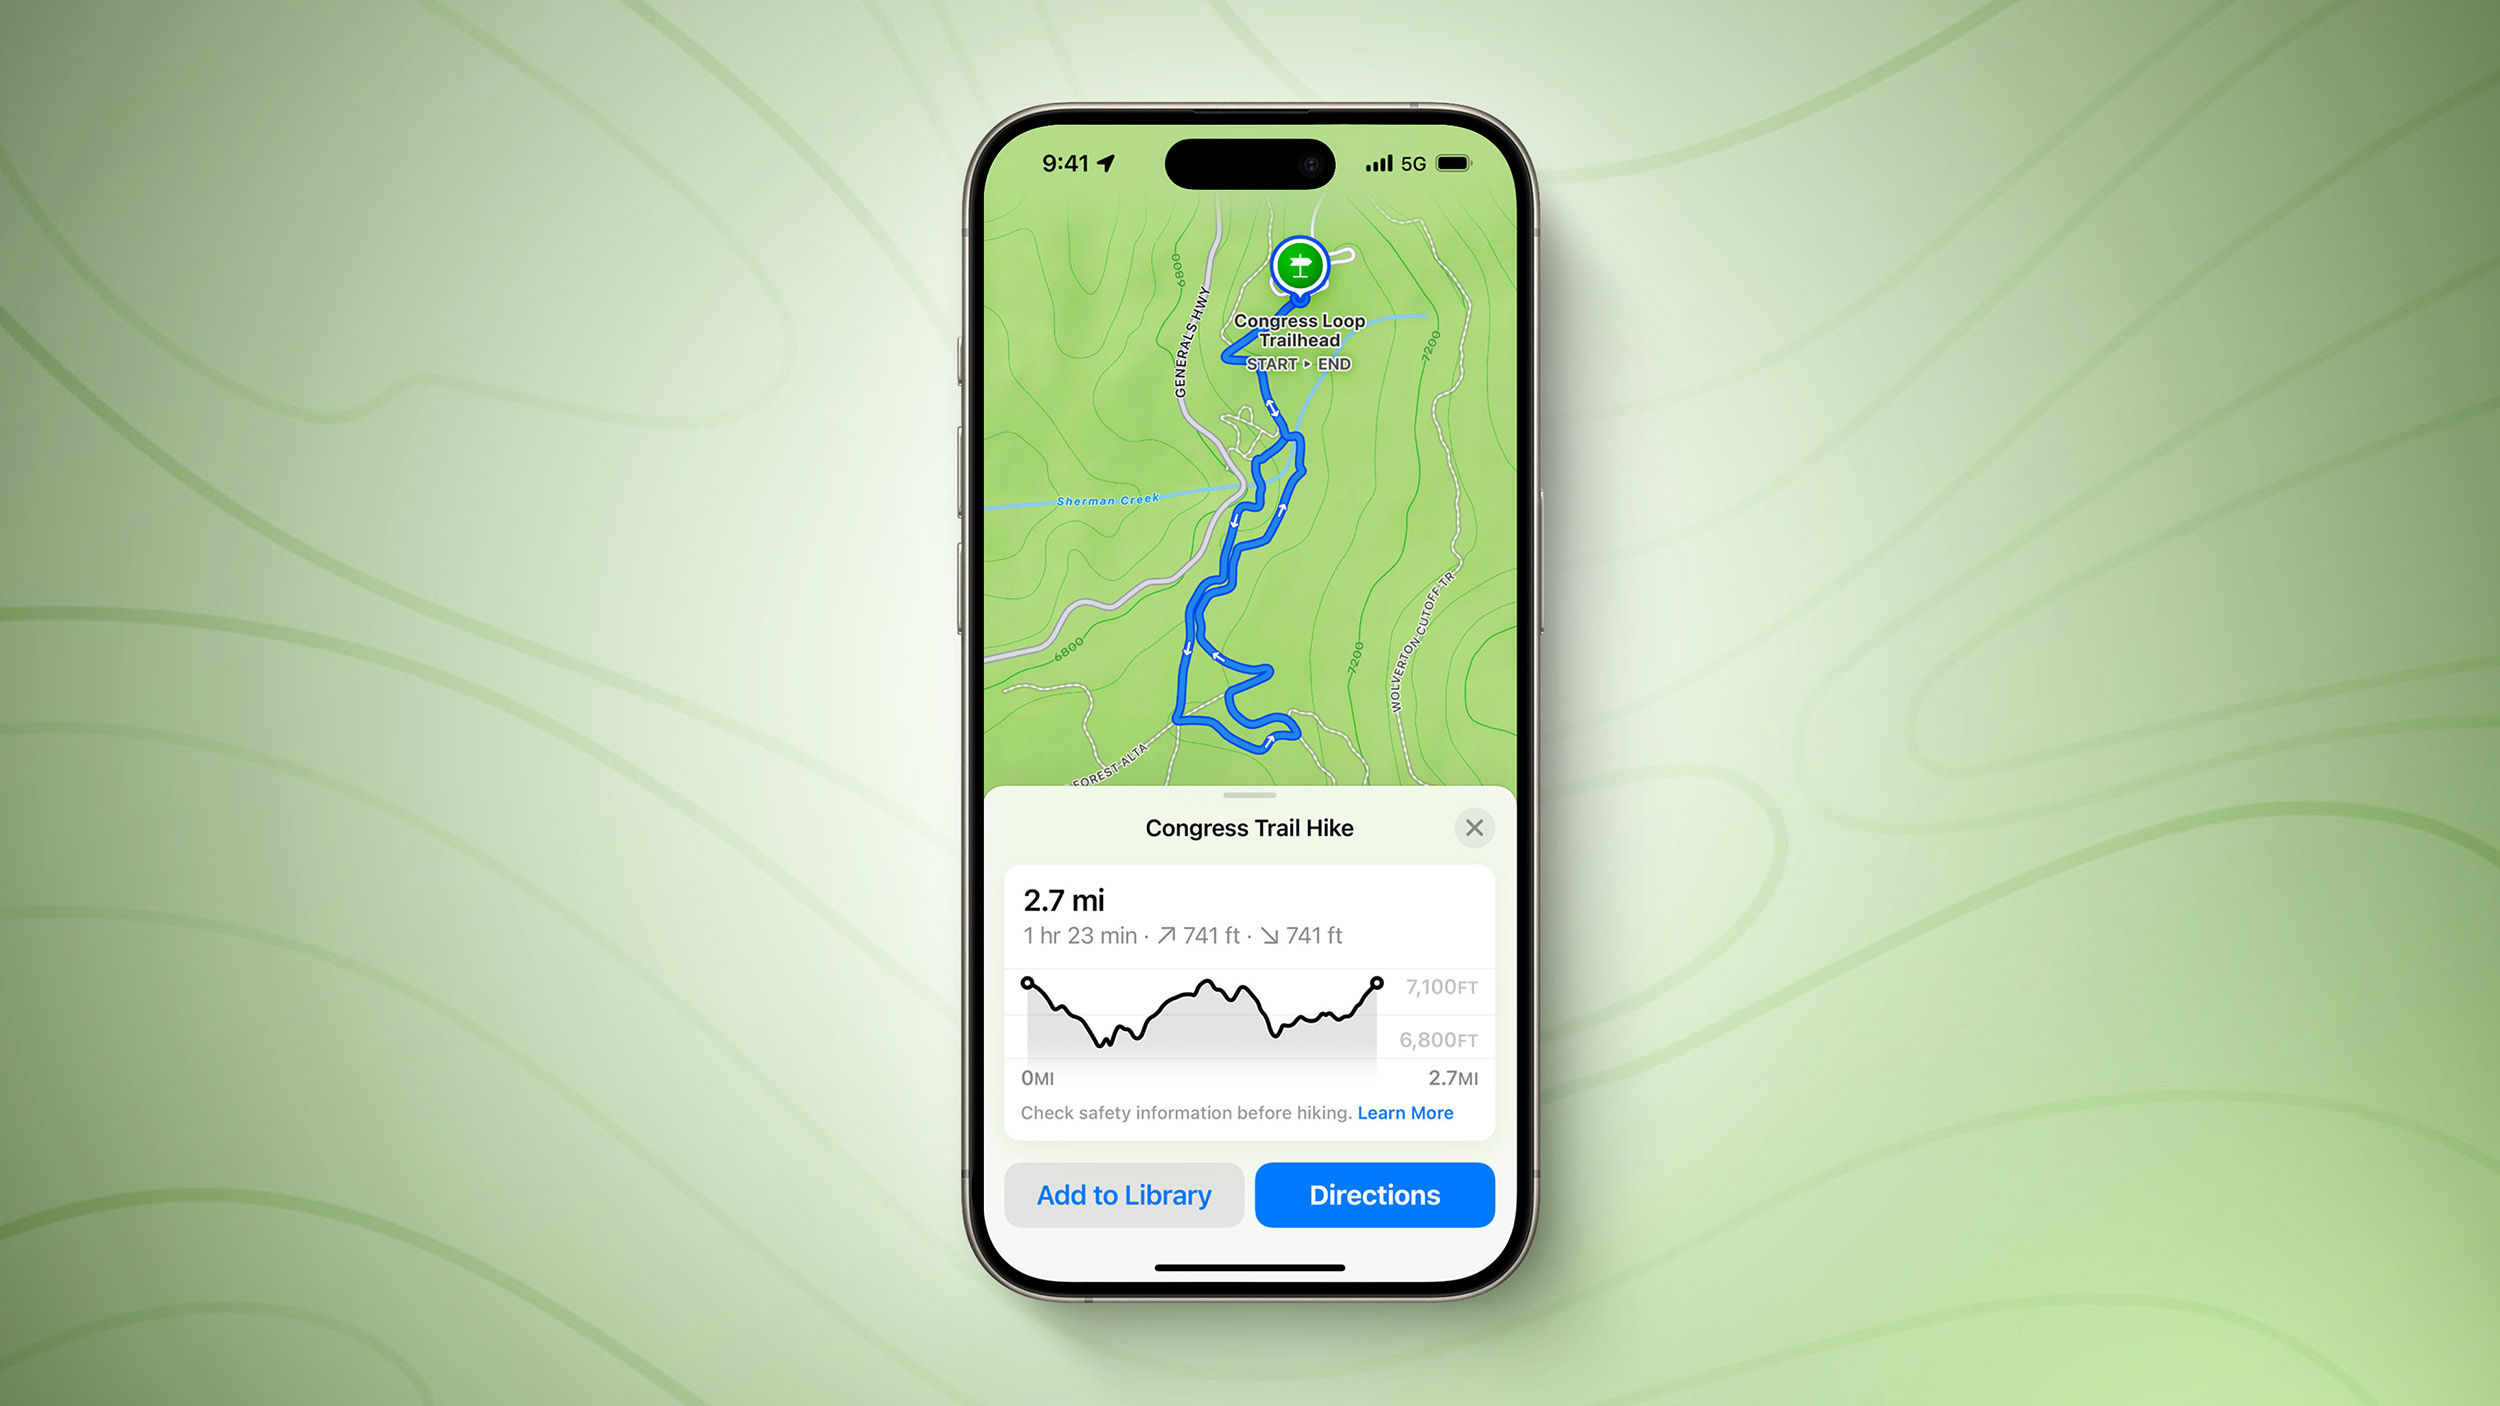 Apple Maps Rivals AllTrails on iOS 18 With New Hiking Features in U.S.